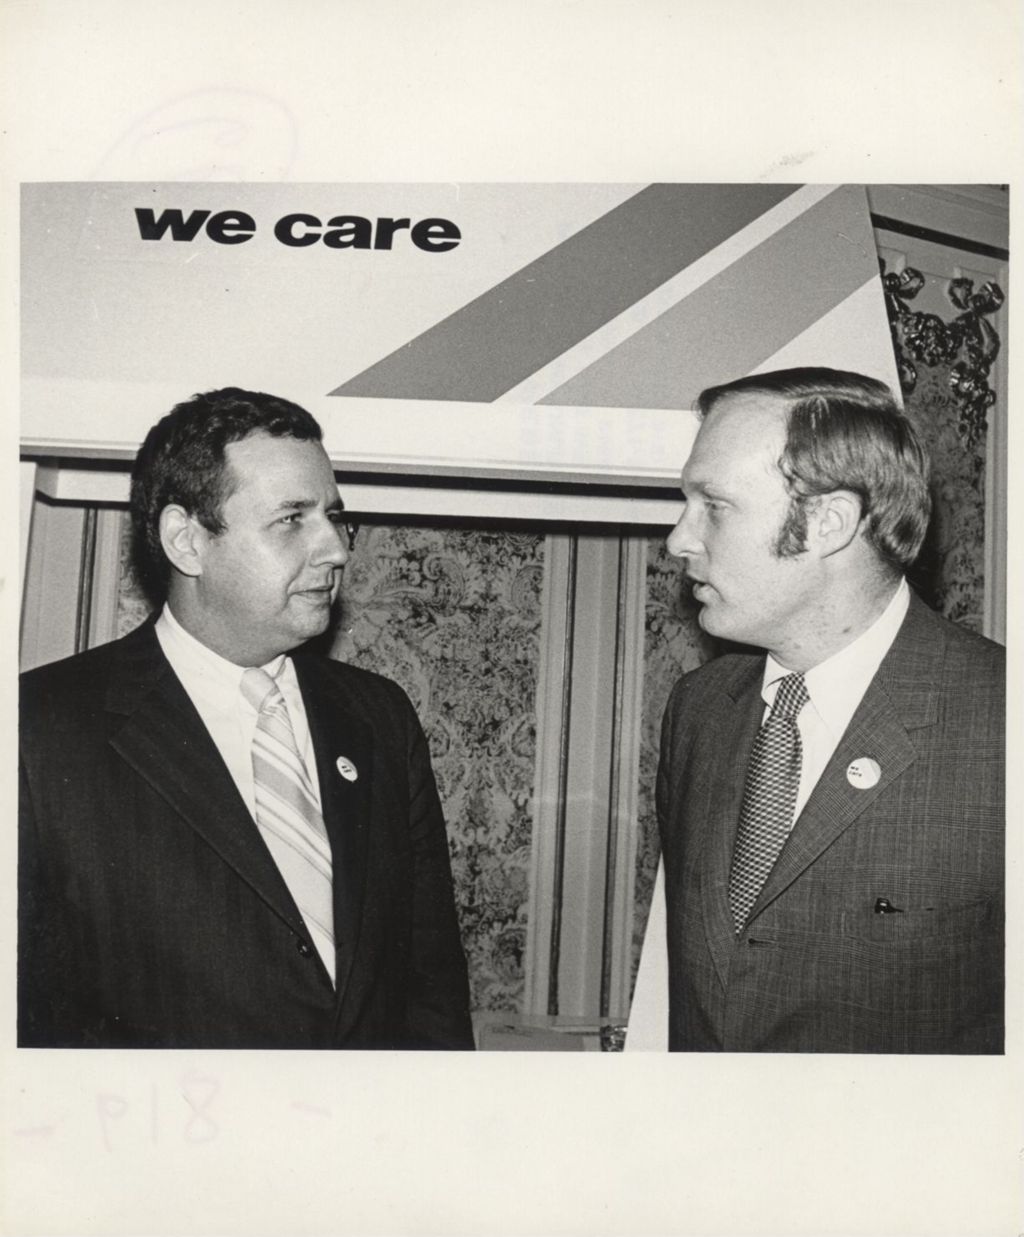 Miniature of Two men at a "We Care" campaign event